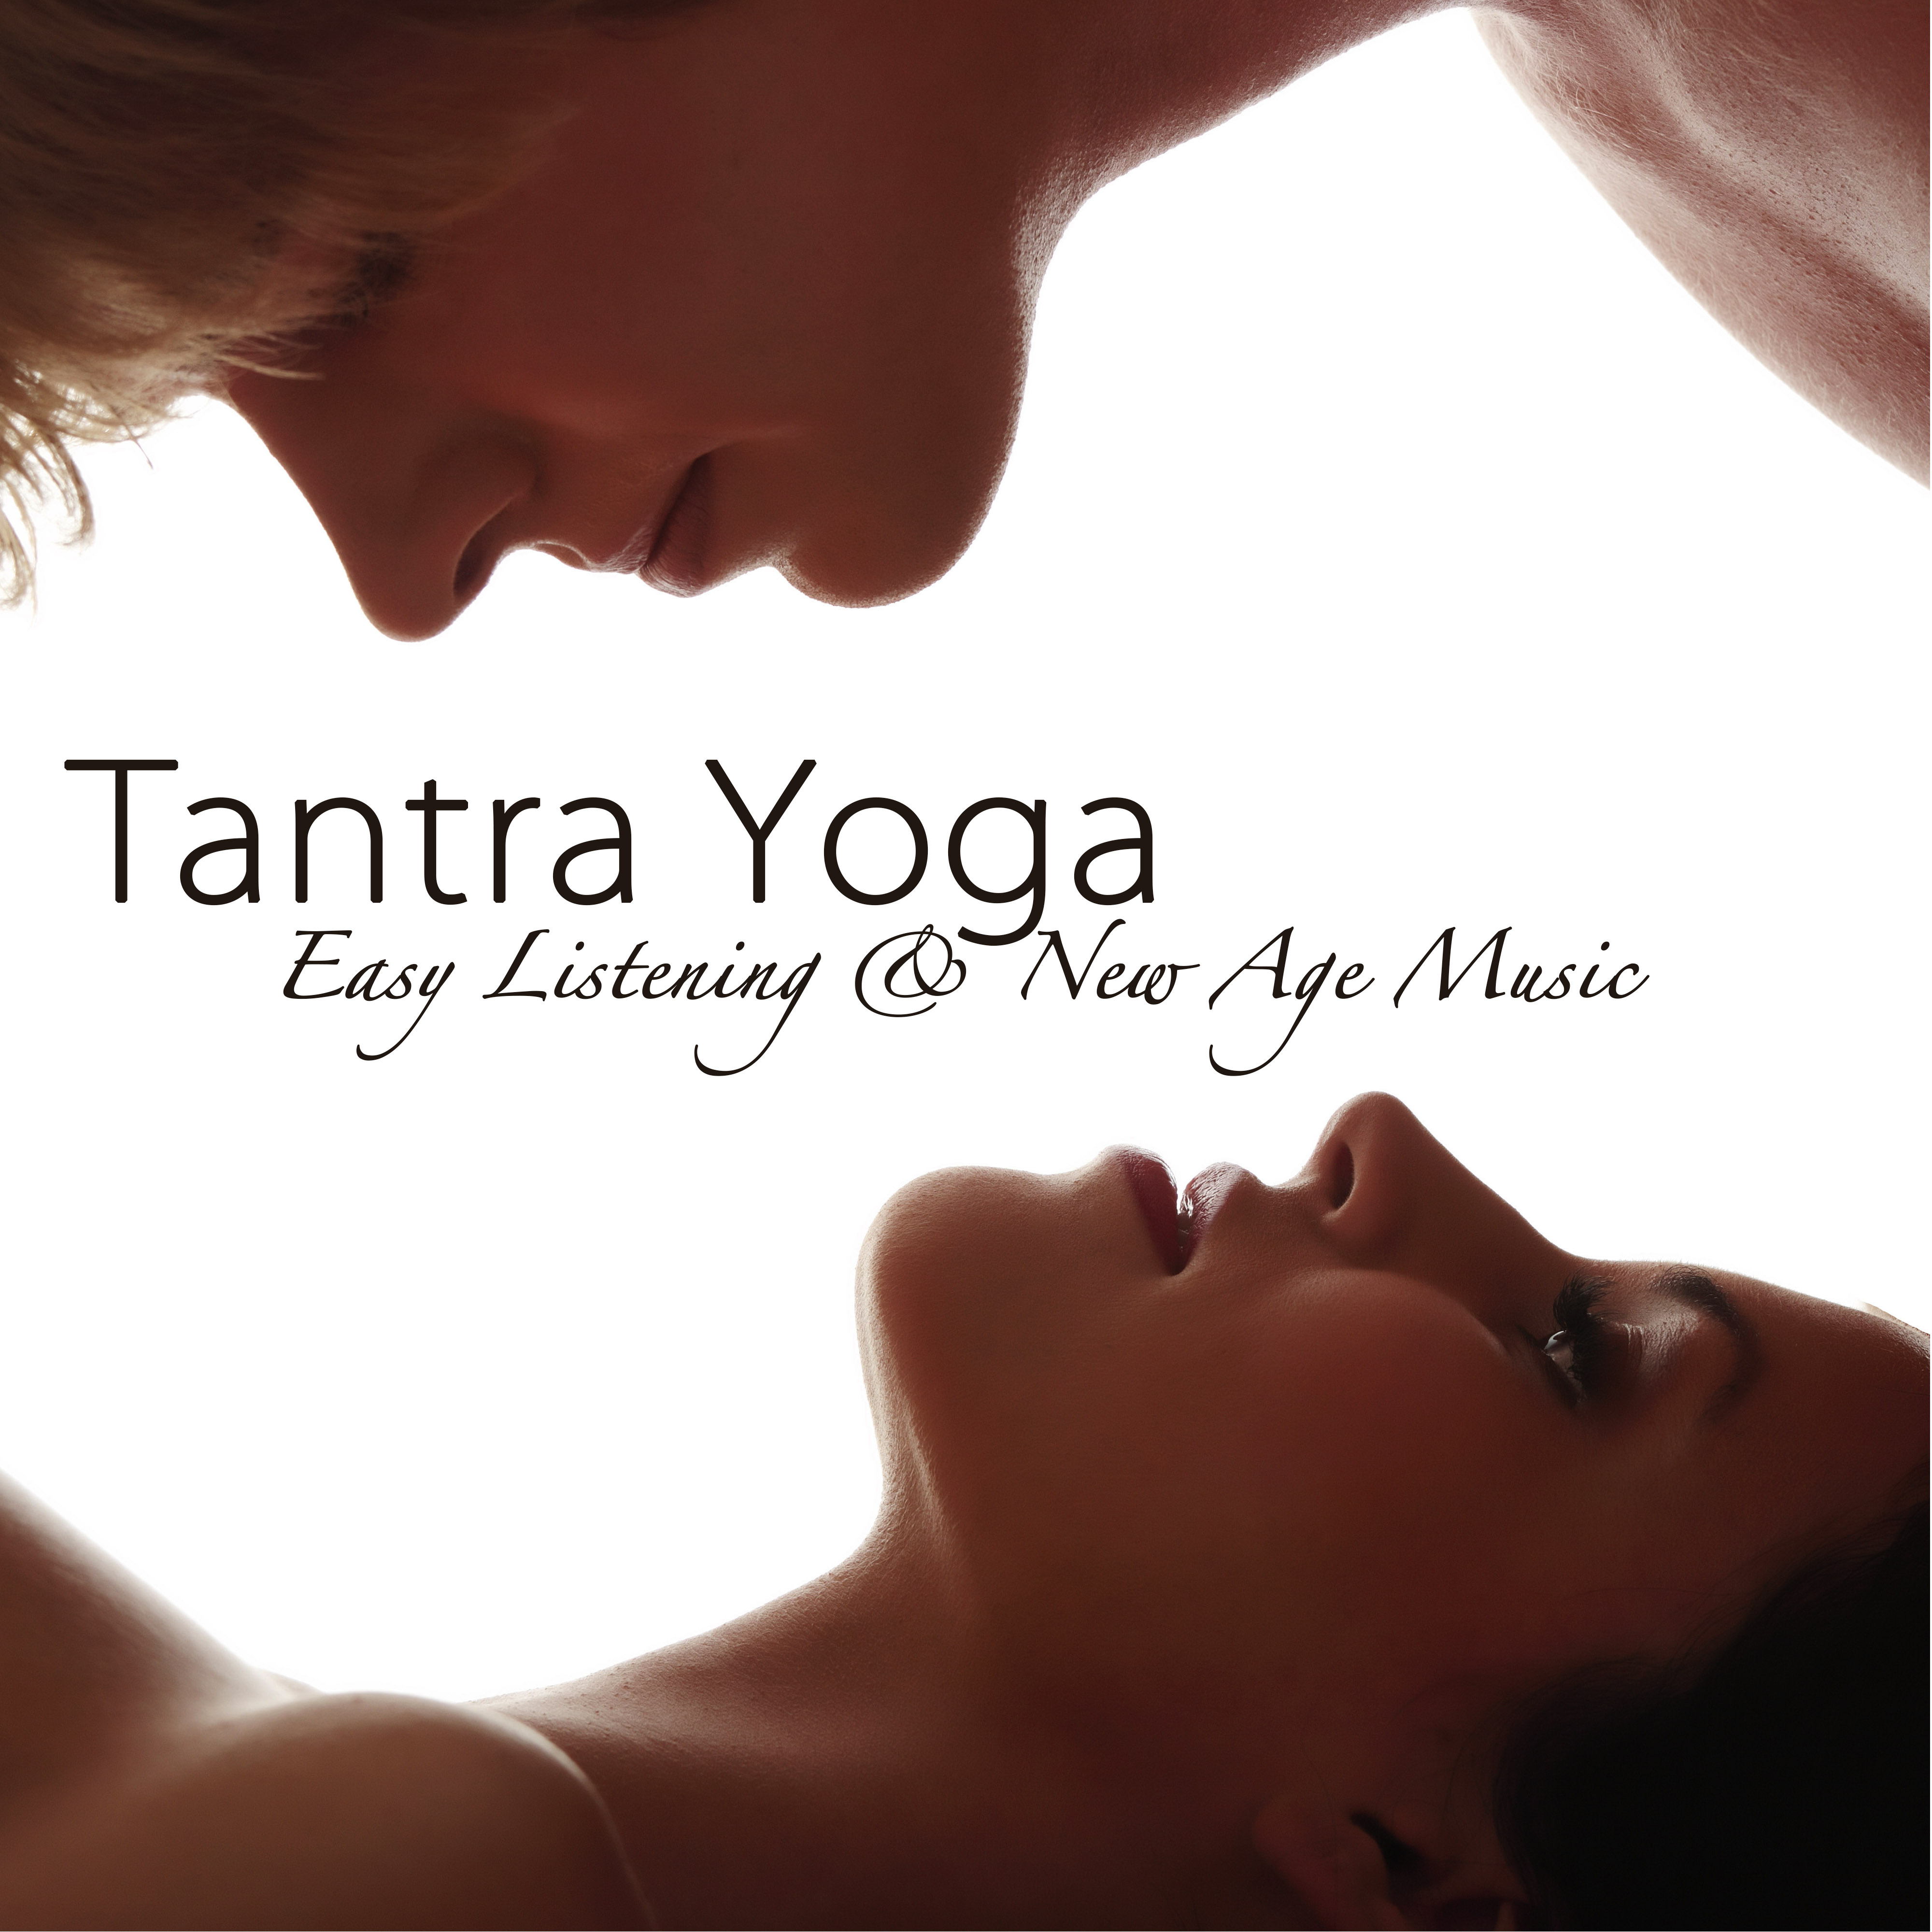 Tantra Yoga  Easy Listening  New Age Music for Yoga, Tantric Love  Massage